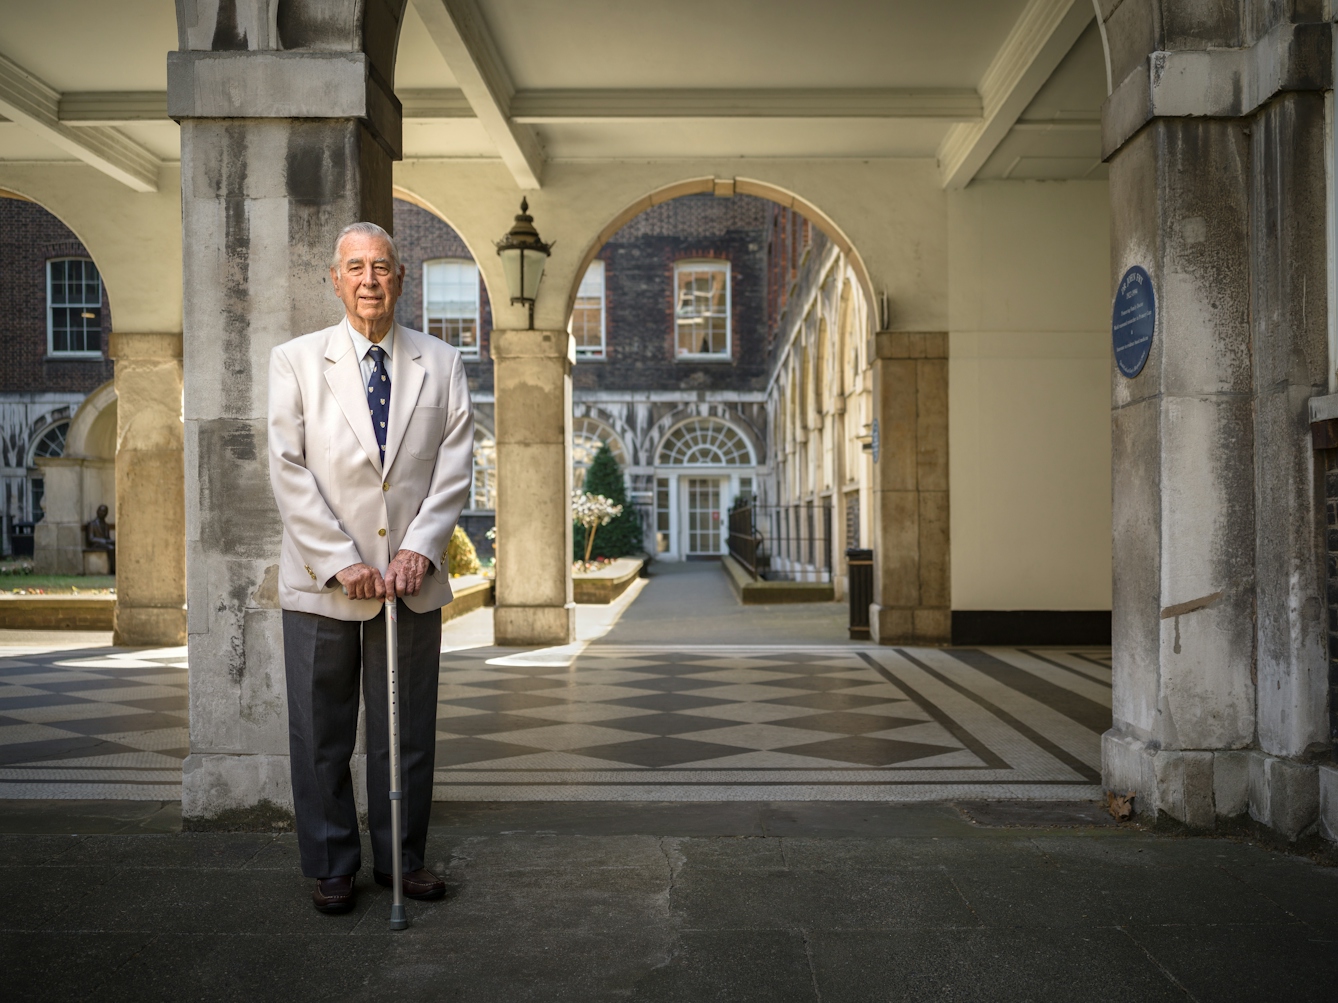 Photographic full length portrait of Leslie Cheeseman, a retired dentist, at Guy's Hospital.